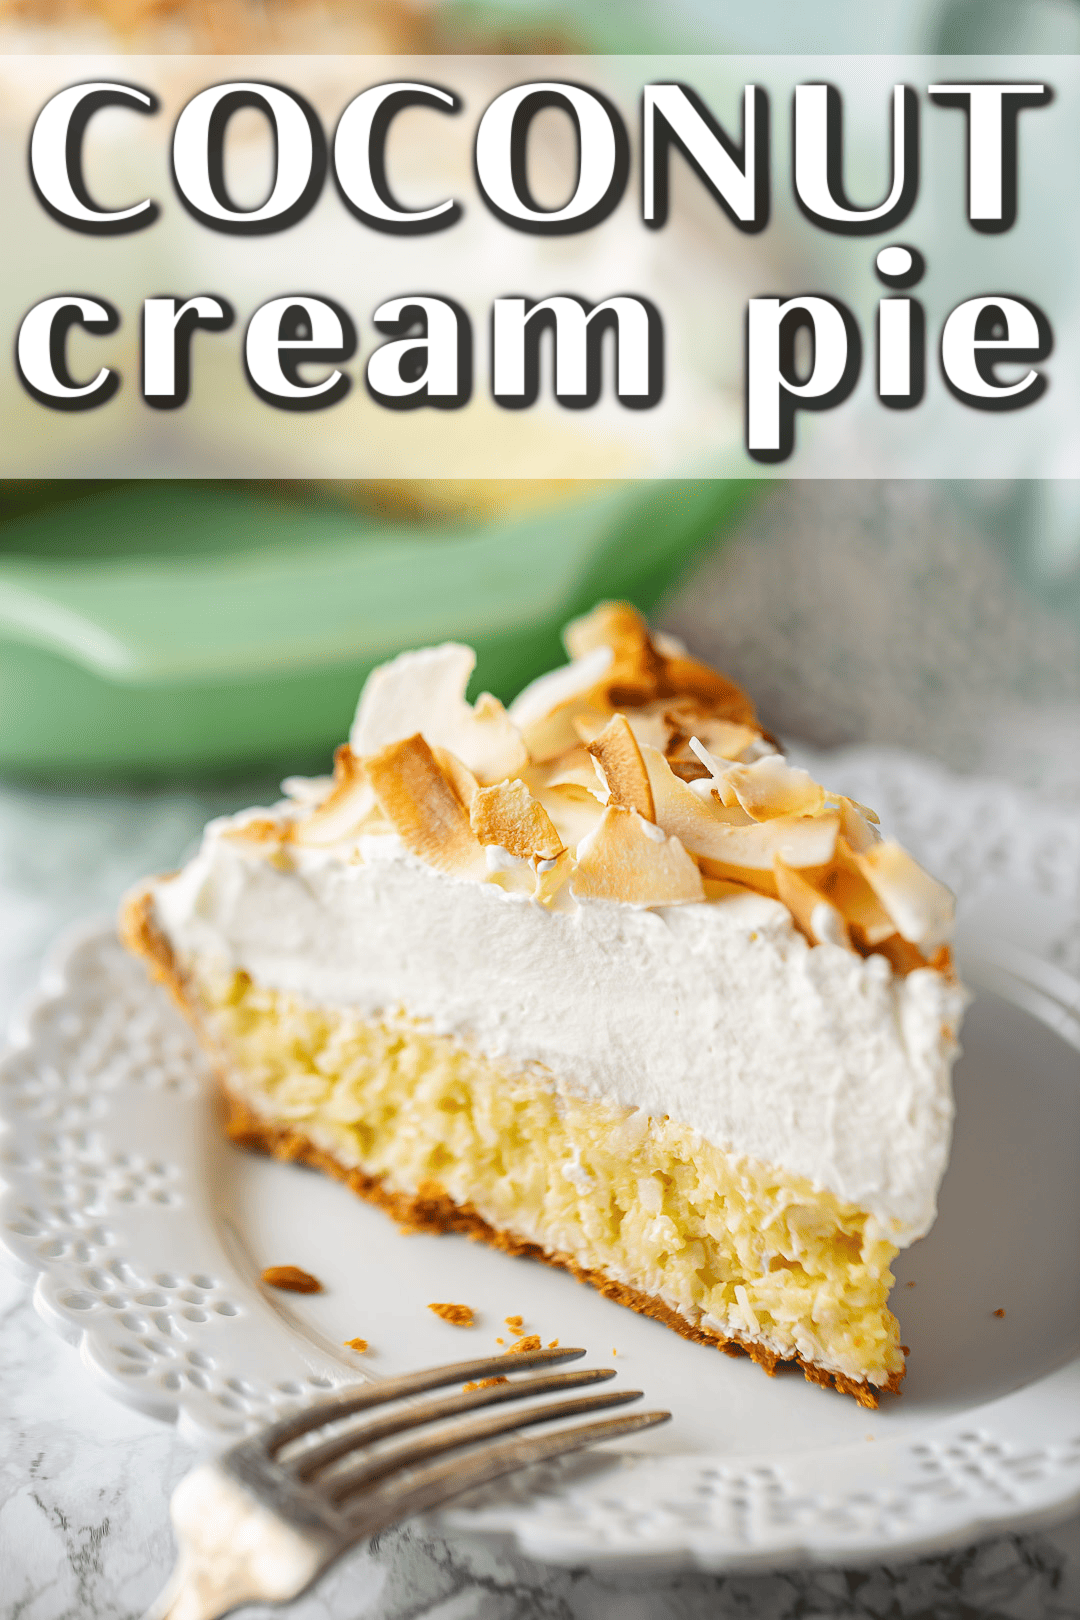 Coconut cream pie recipe, made, sliced, and served with a vintage silver fork.